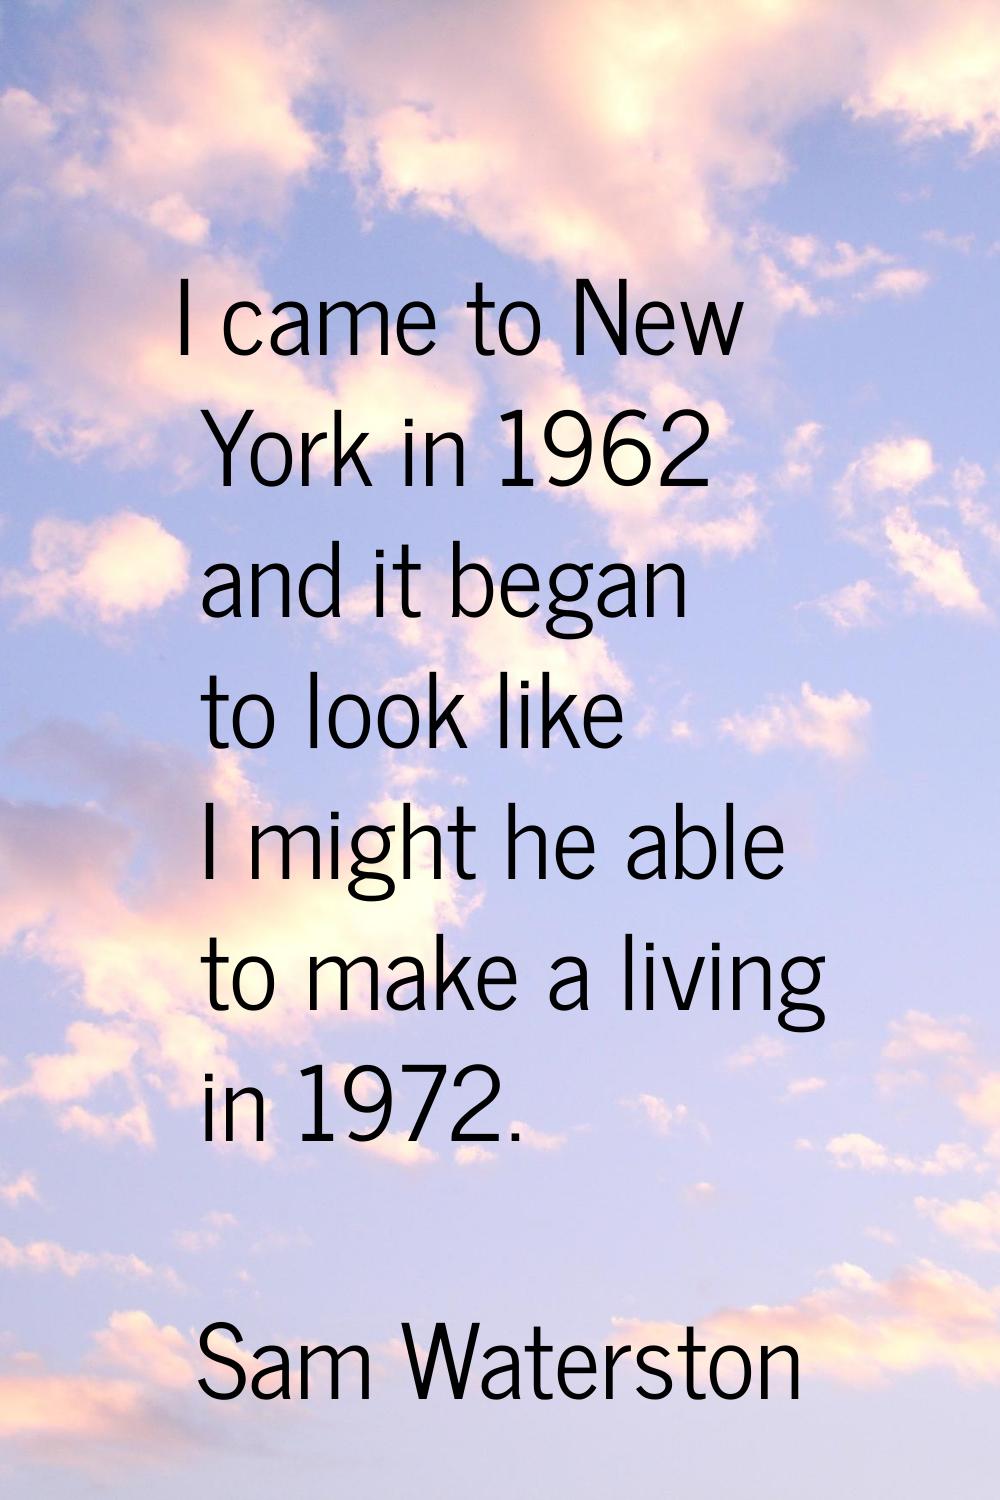 I came to New York in 1962 and it began to look like I might he able to make a living in 1972.